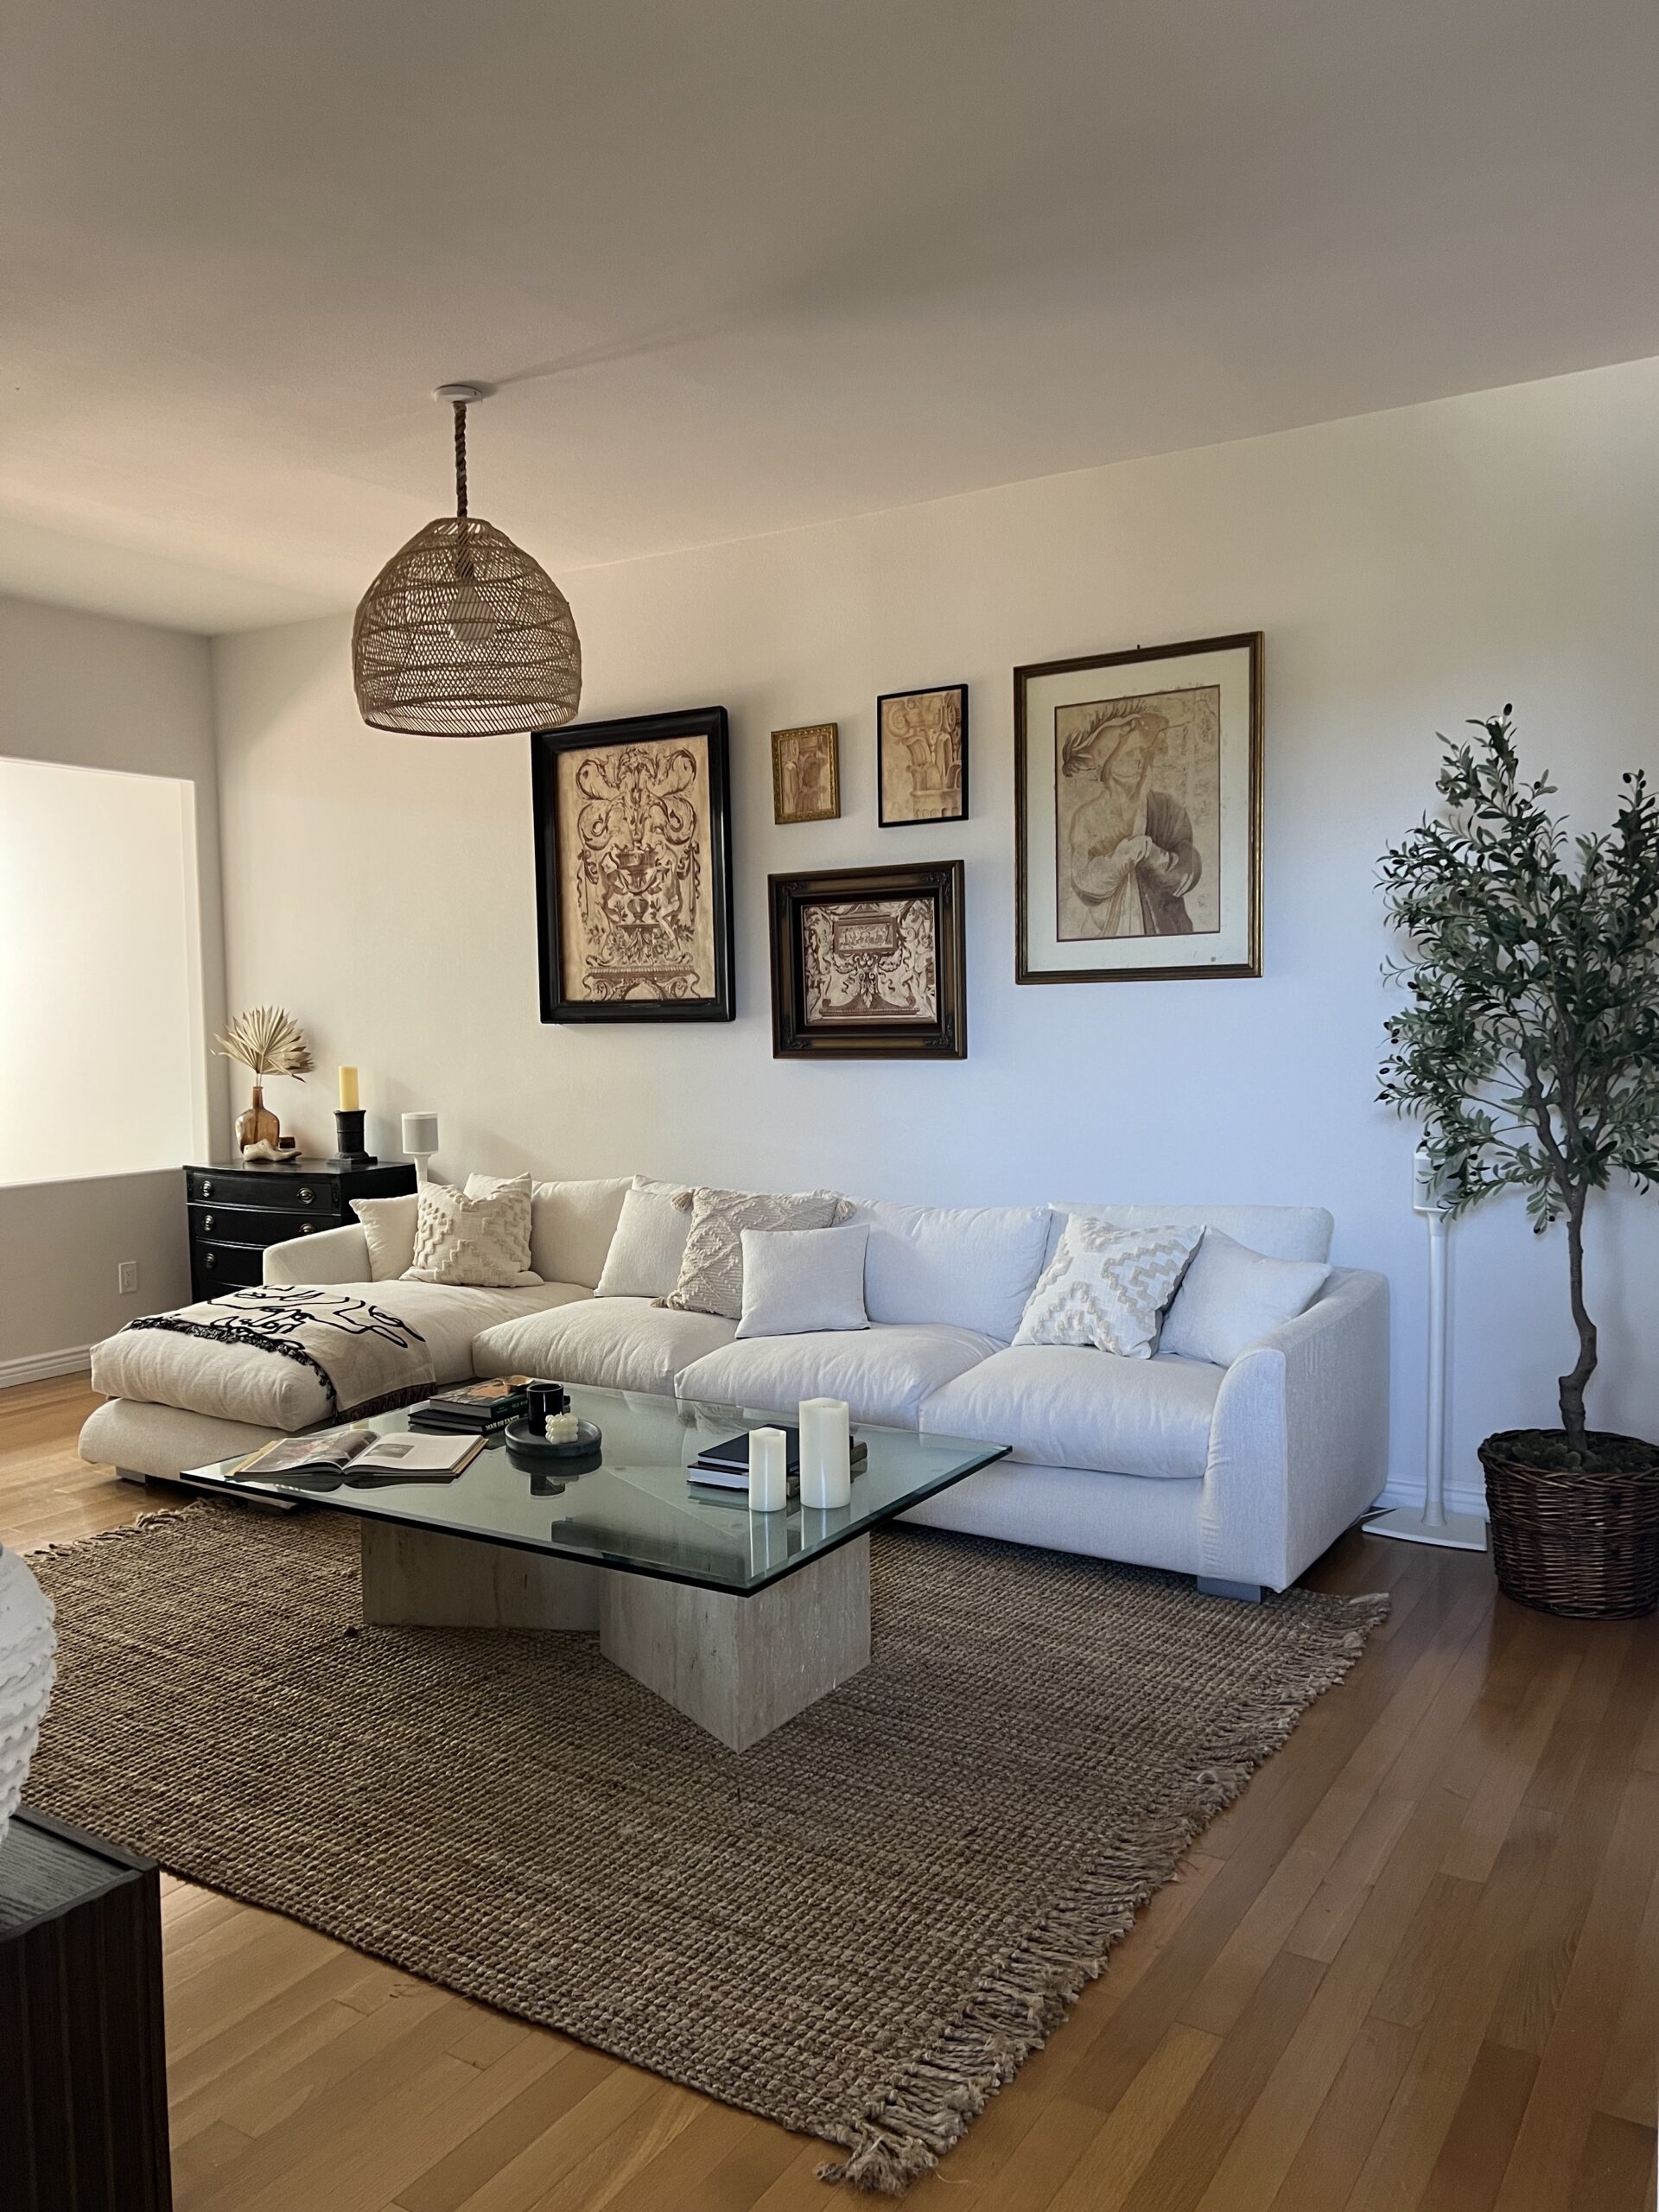 Family Room Decor Ideas: How I Styled my Modern Mediterranean Space